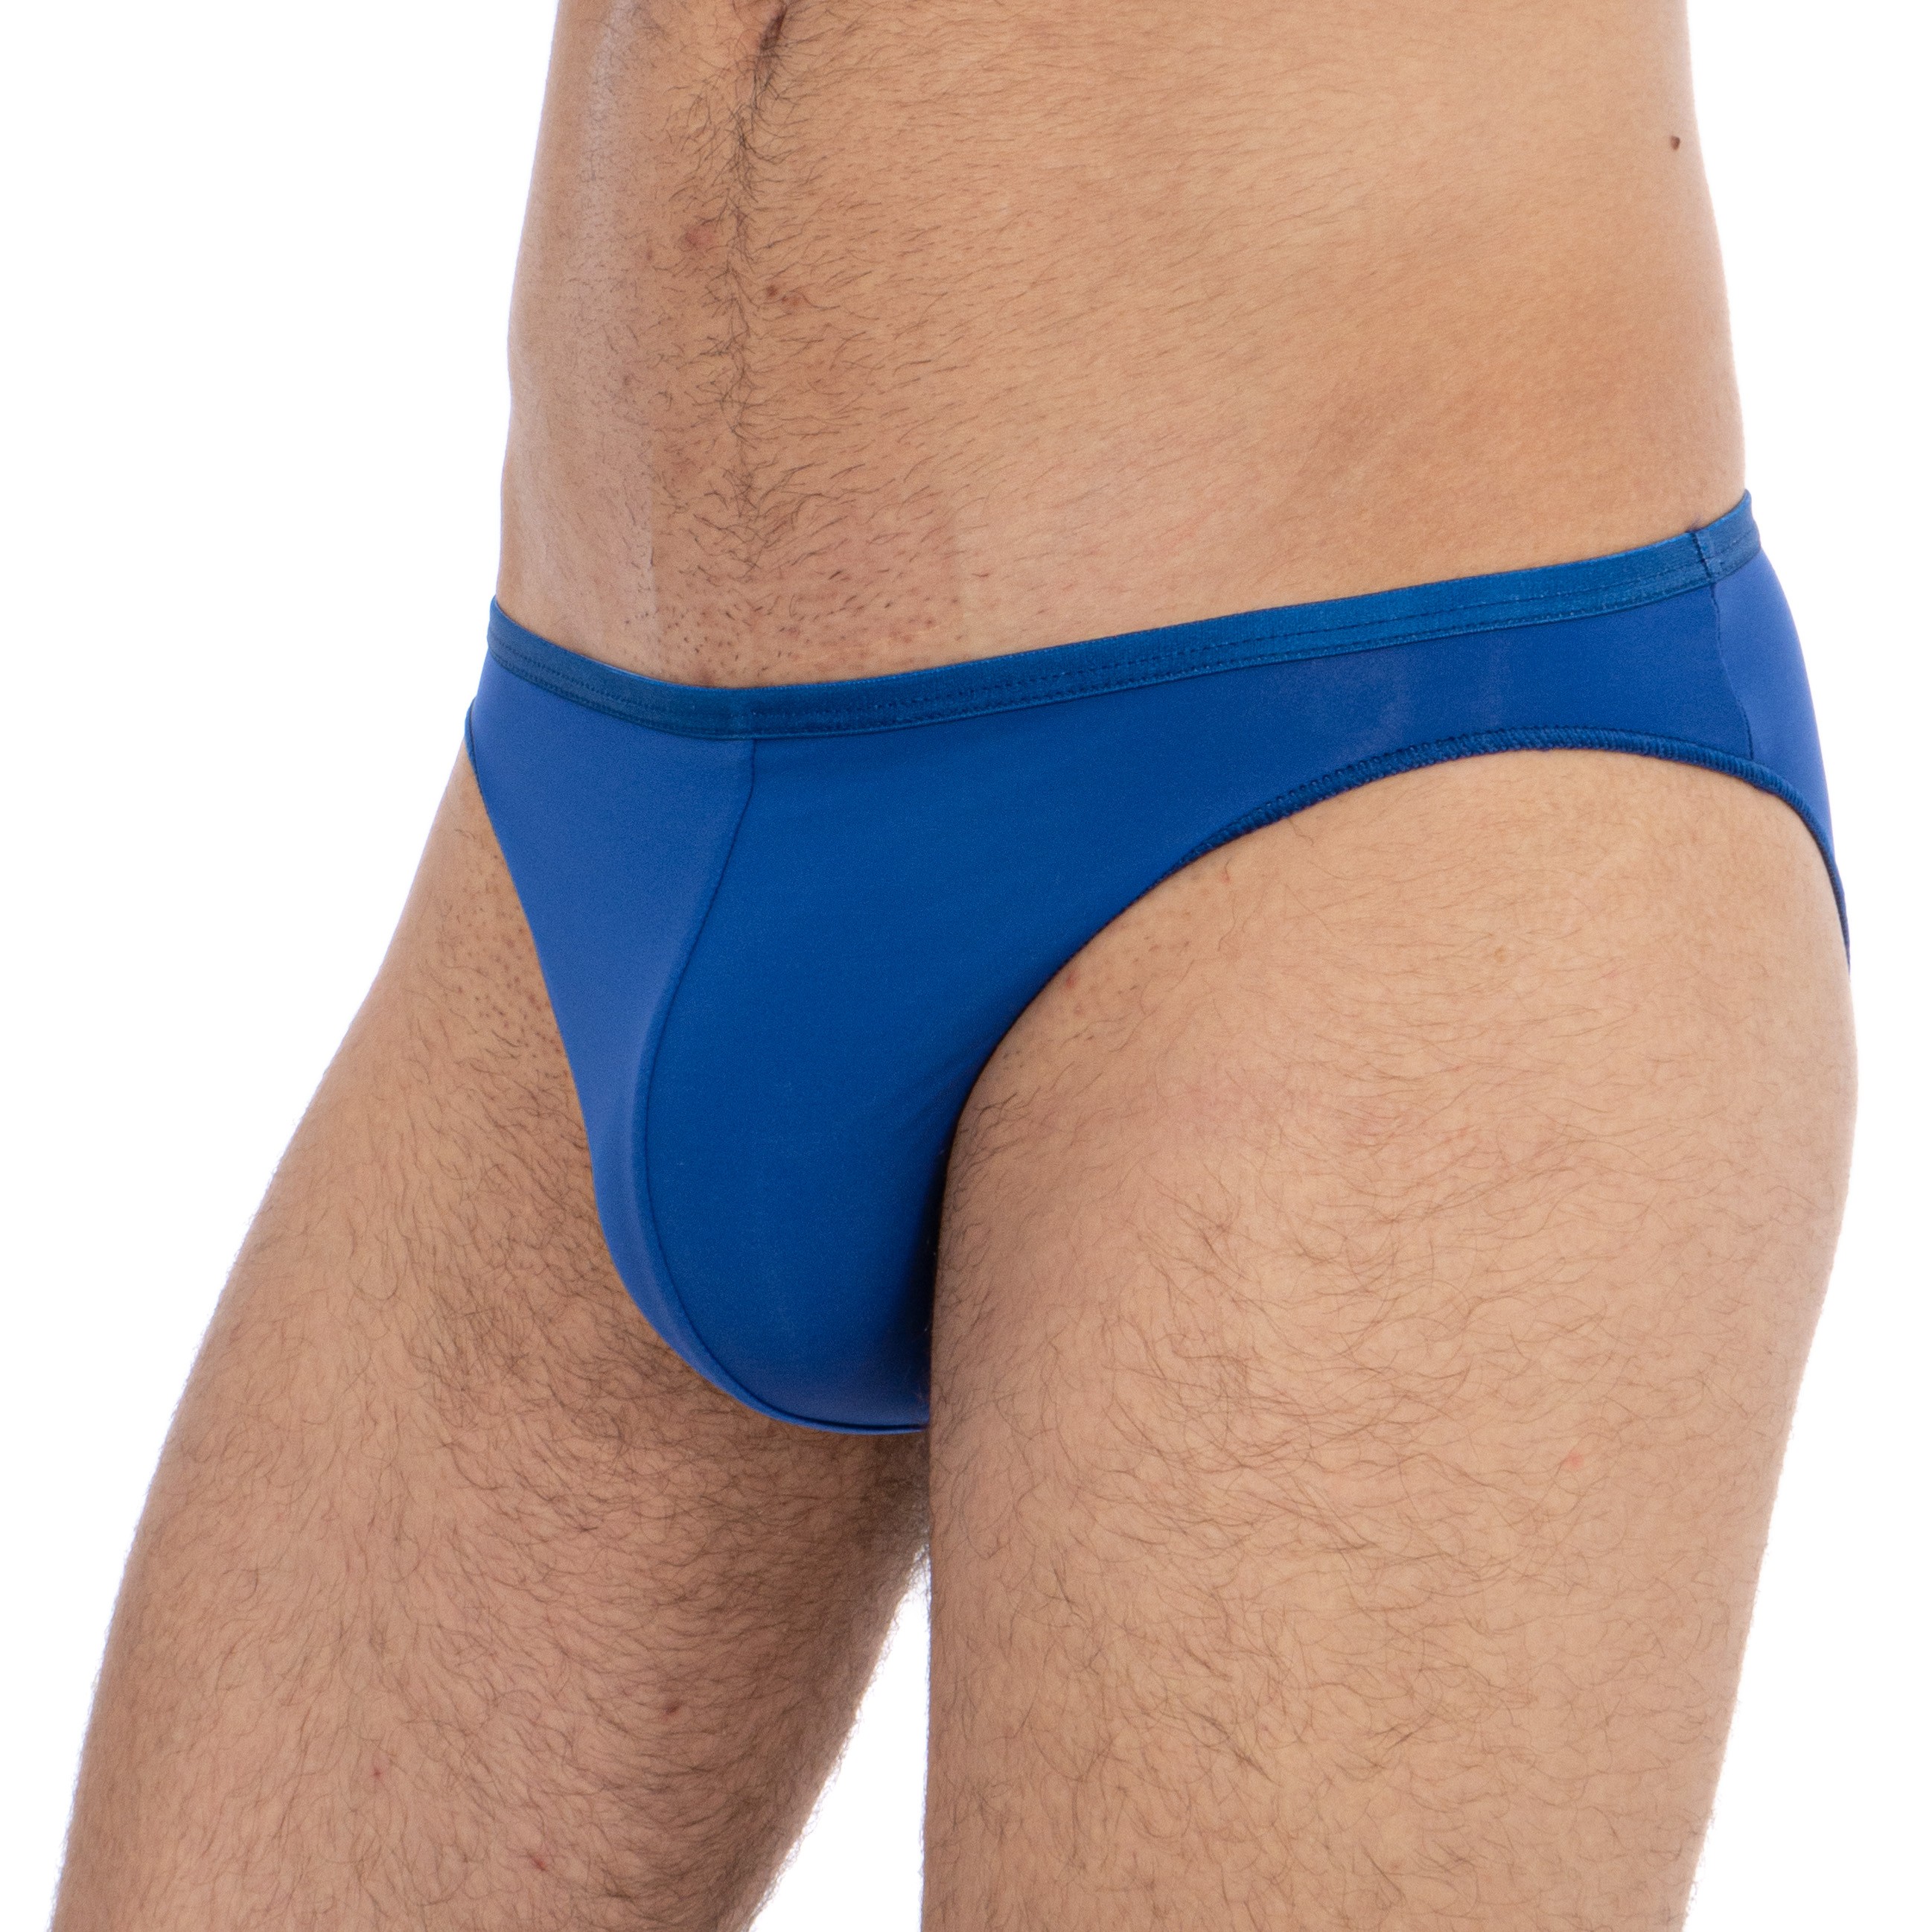 Slip micro Feathers - blue: Briefs for man brand HOM for sale onlin